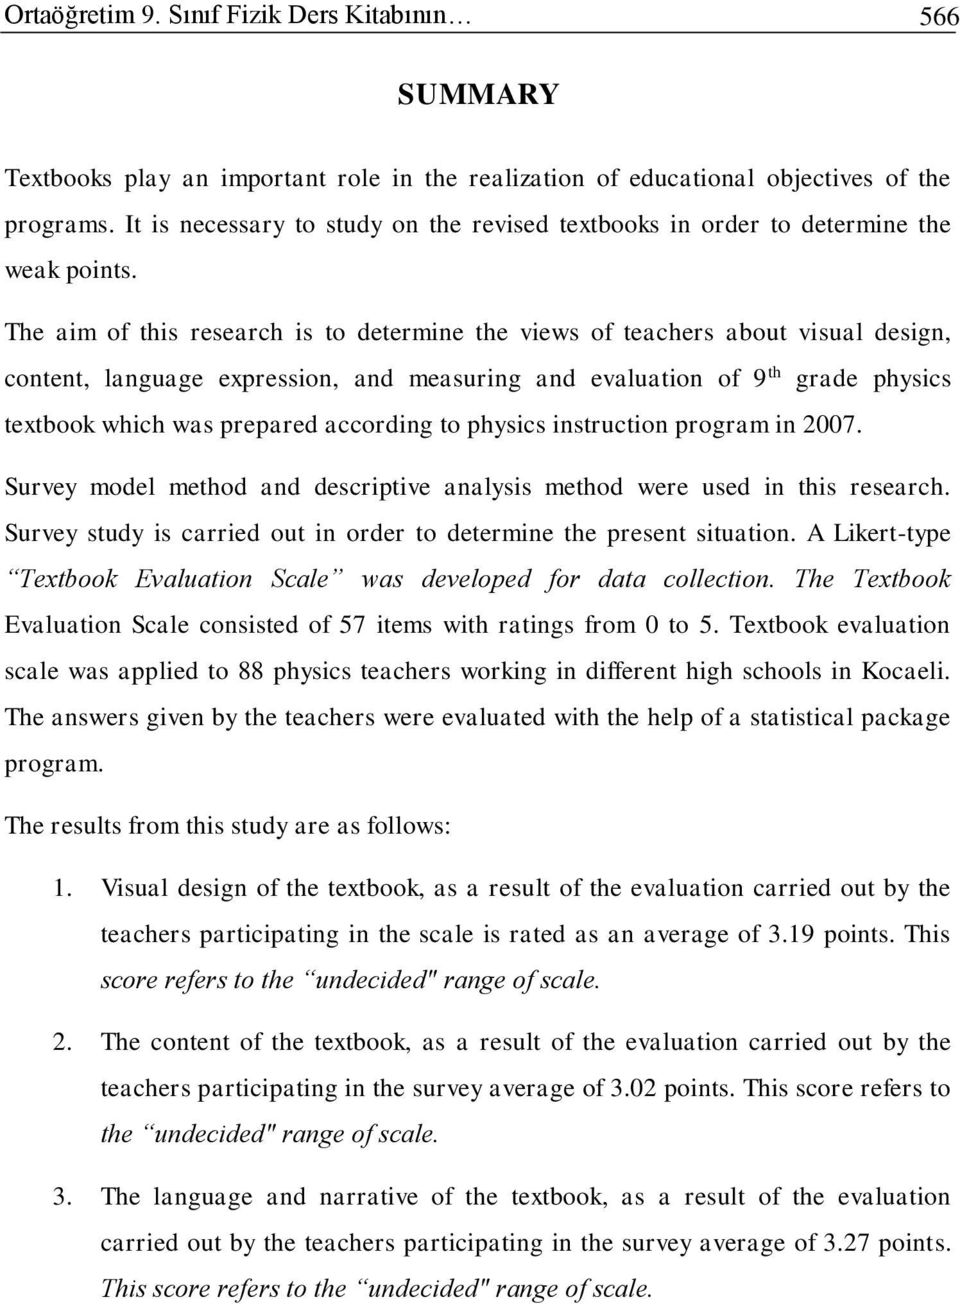 The aim of this research is to determine the views of teachers about visual design, content, language expression, and measuring and evaluation of 9 th grade physics textbook which was prepared